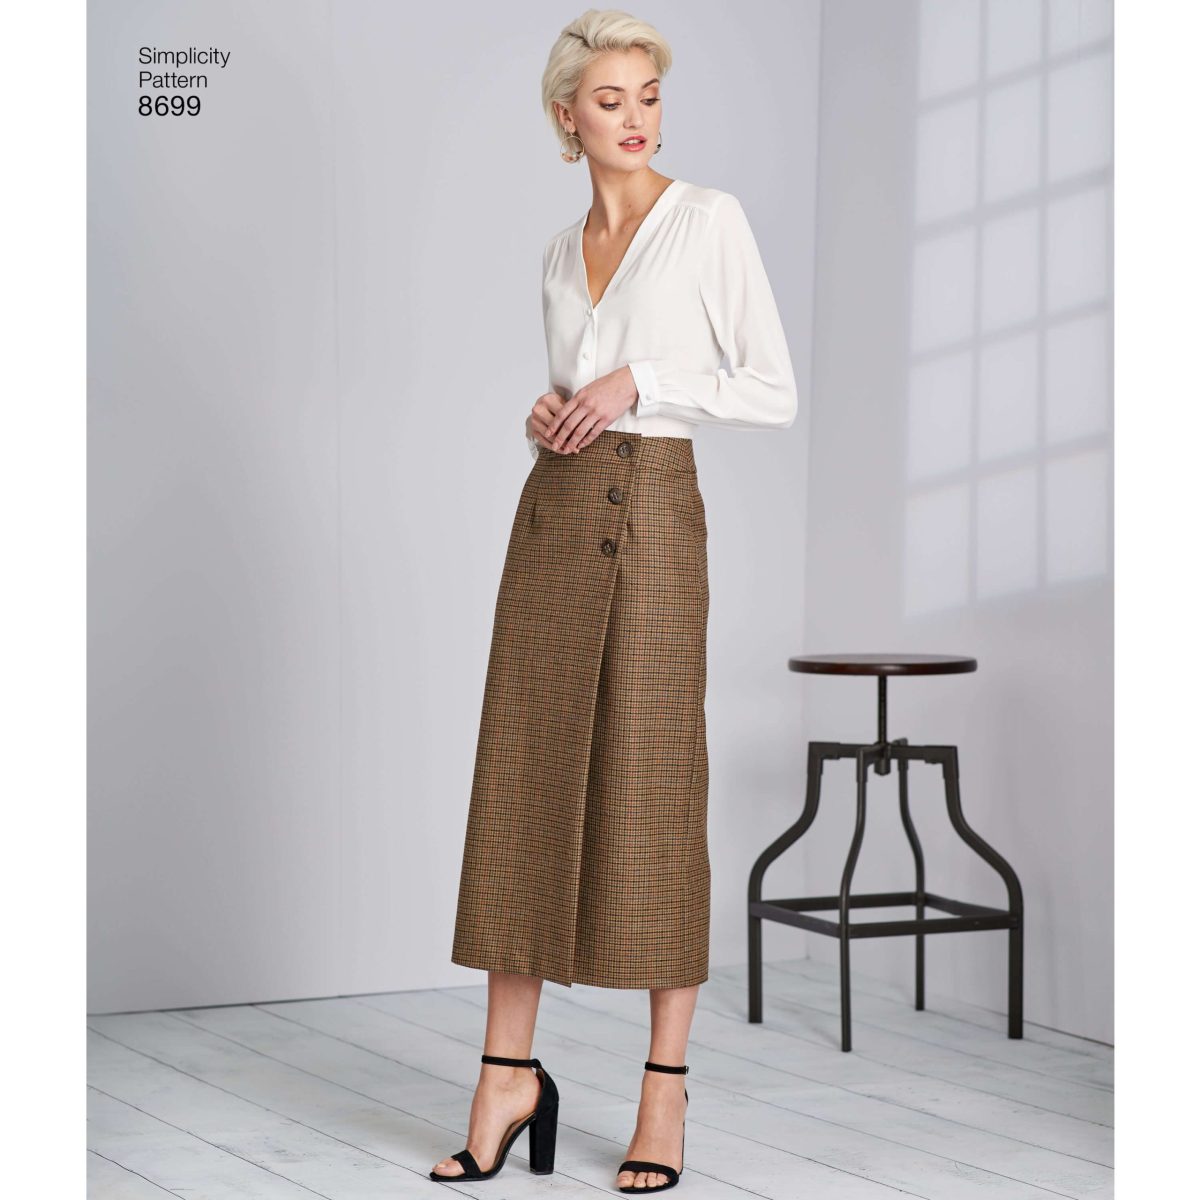 Simplicity 8699 Women's Wrap Skirts with Length Variations